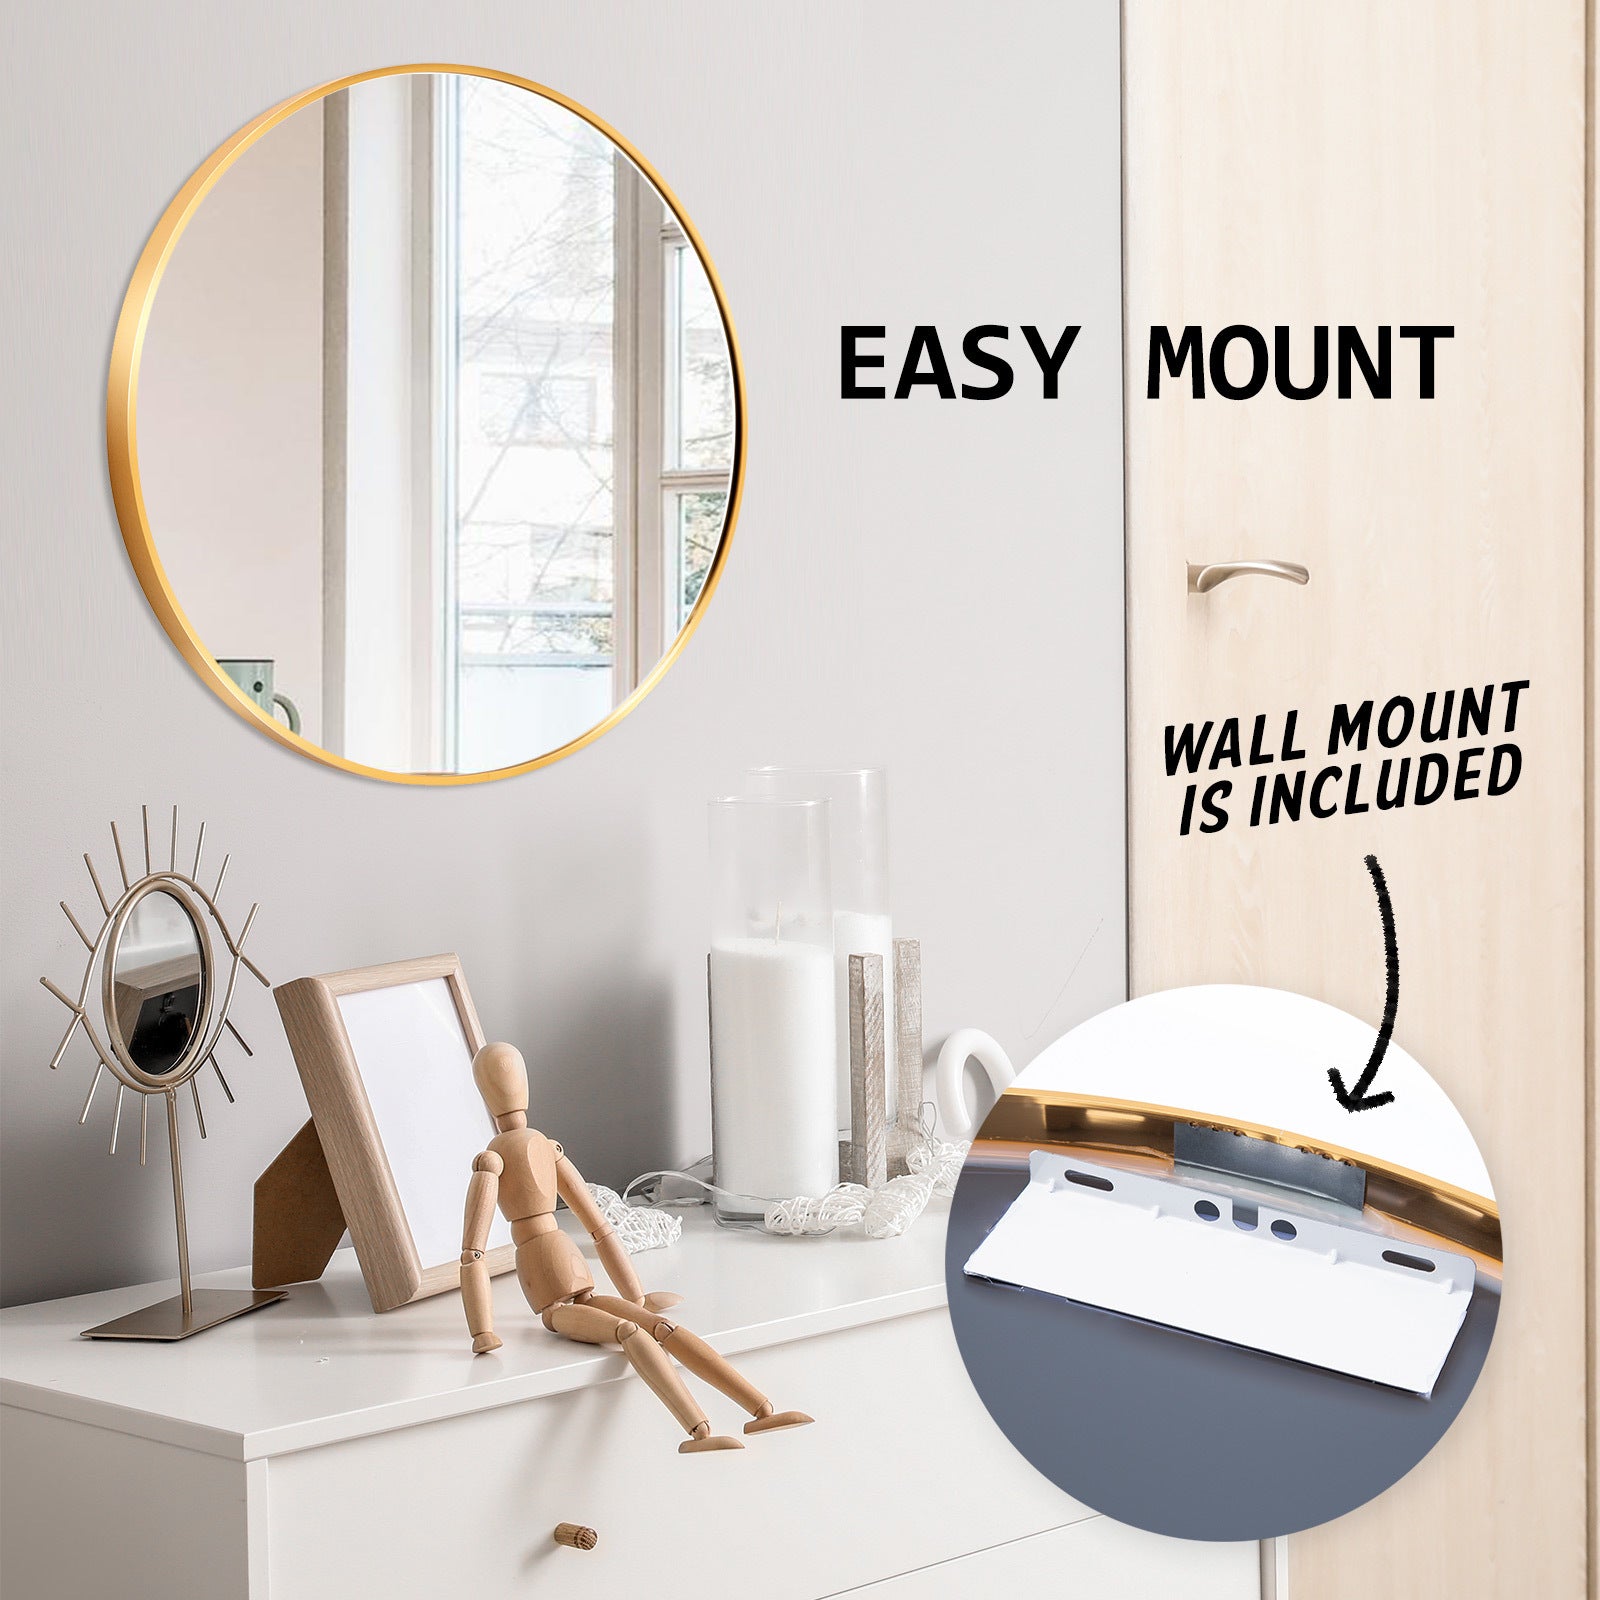 Free shipping on this La Bella Gold Wall Mirror Round Aluminum Frame - 60cm